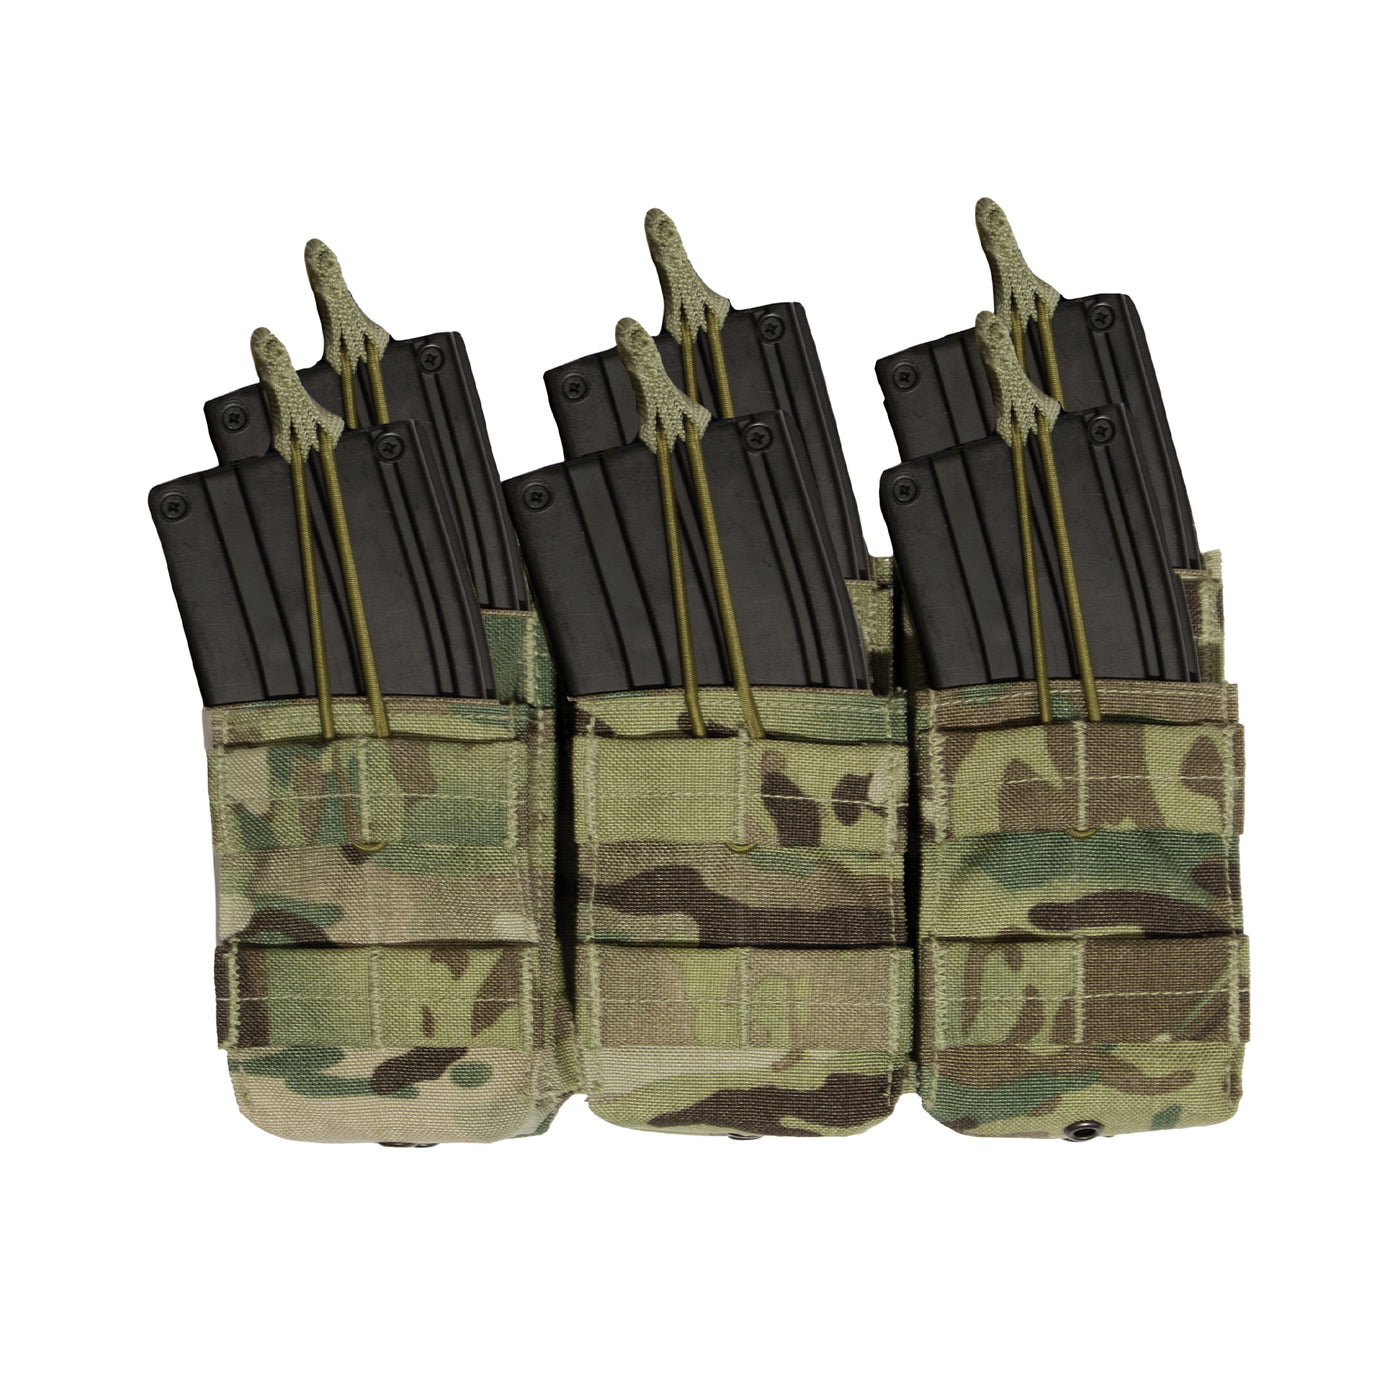 Buy S.T.R.I.K.E.® M4/M16 Triple Mag Pouch (Holds 6) - MOLLE And More